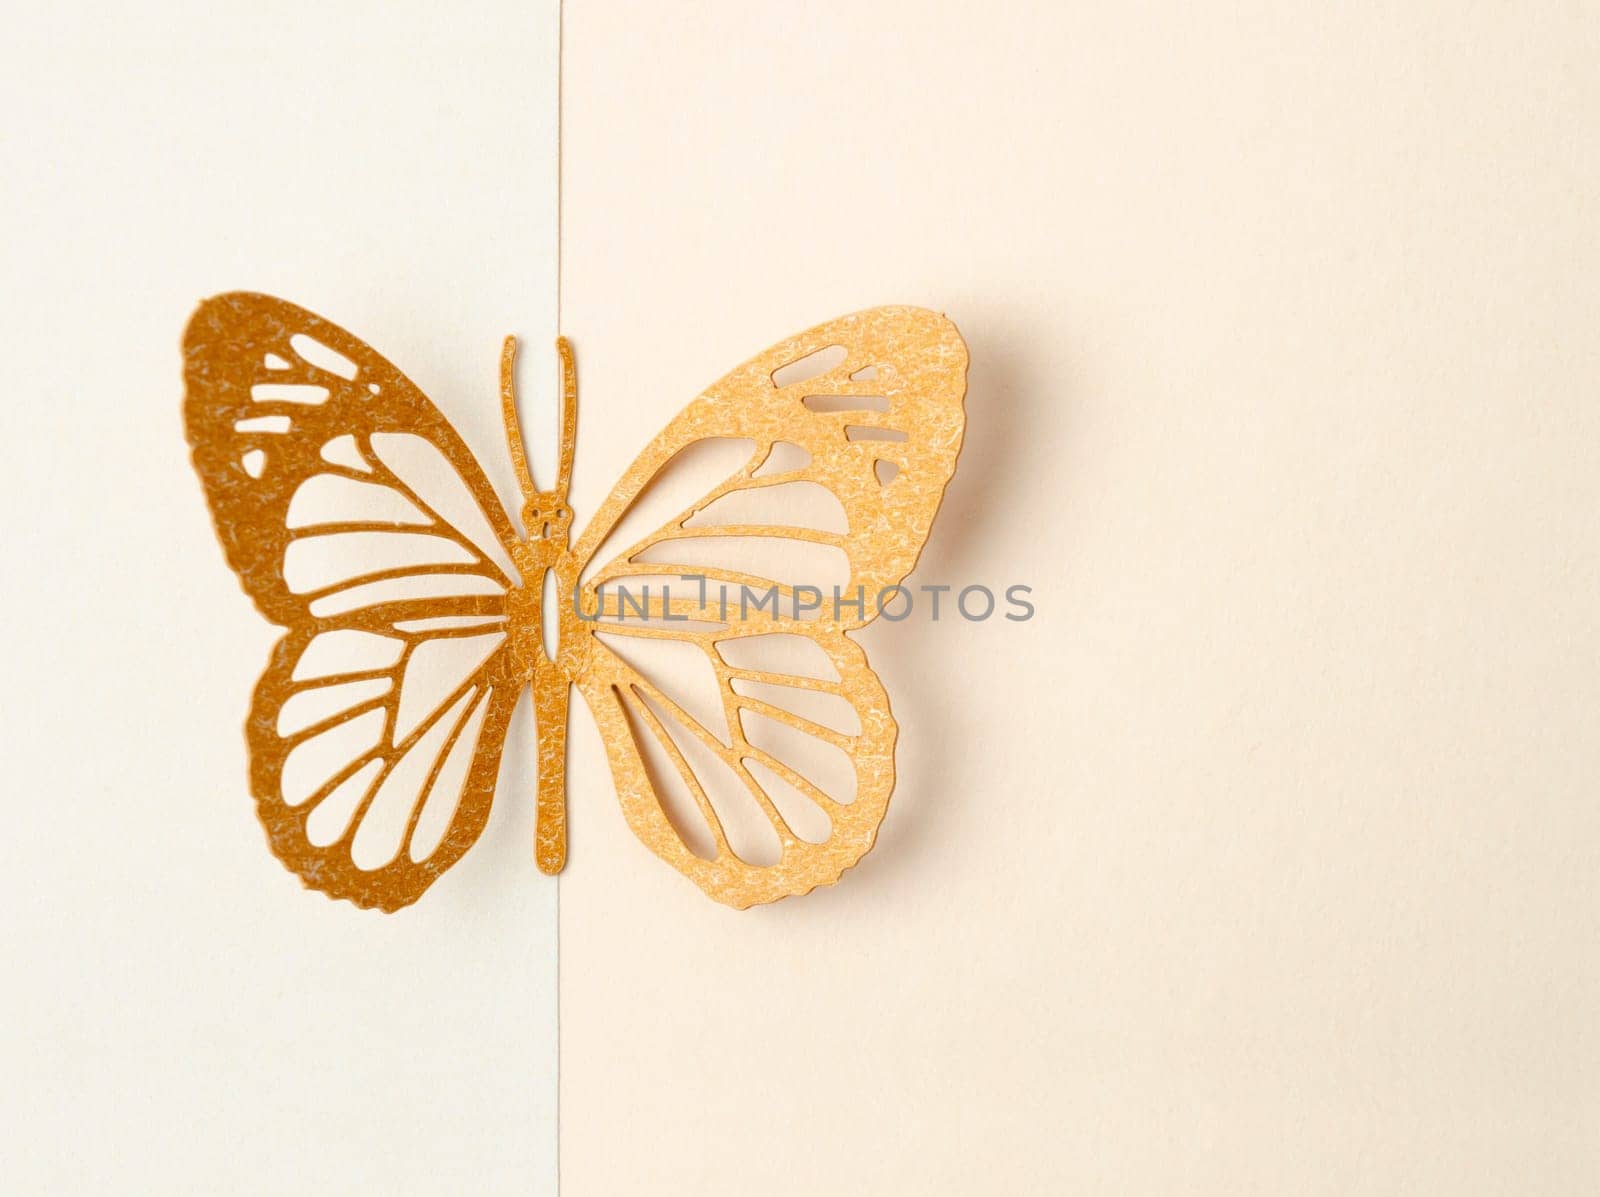 A Butterfly made from carve paper or cutting on yellow background with empty space for your text or message. by Gamjai